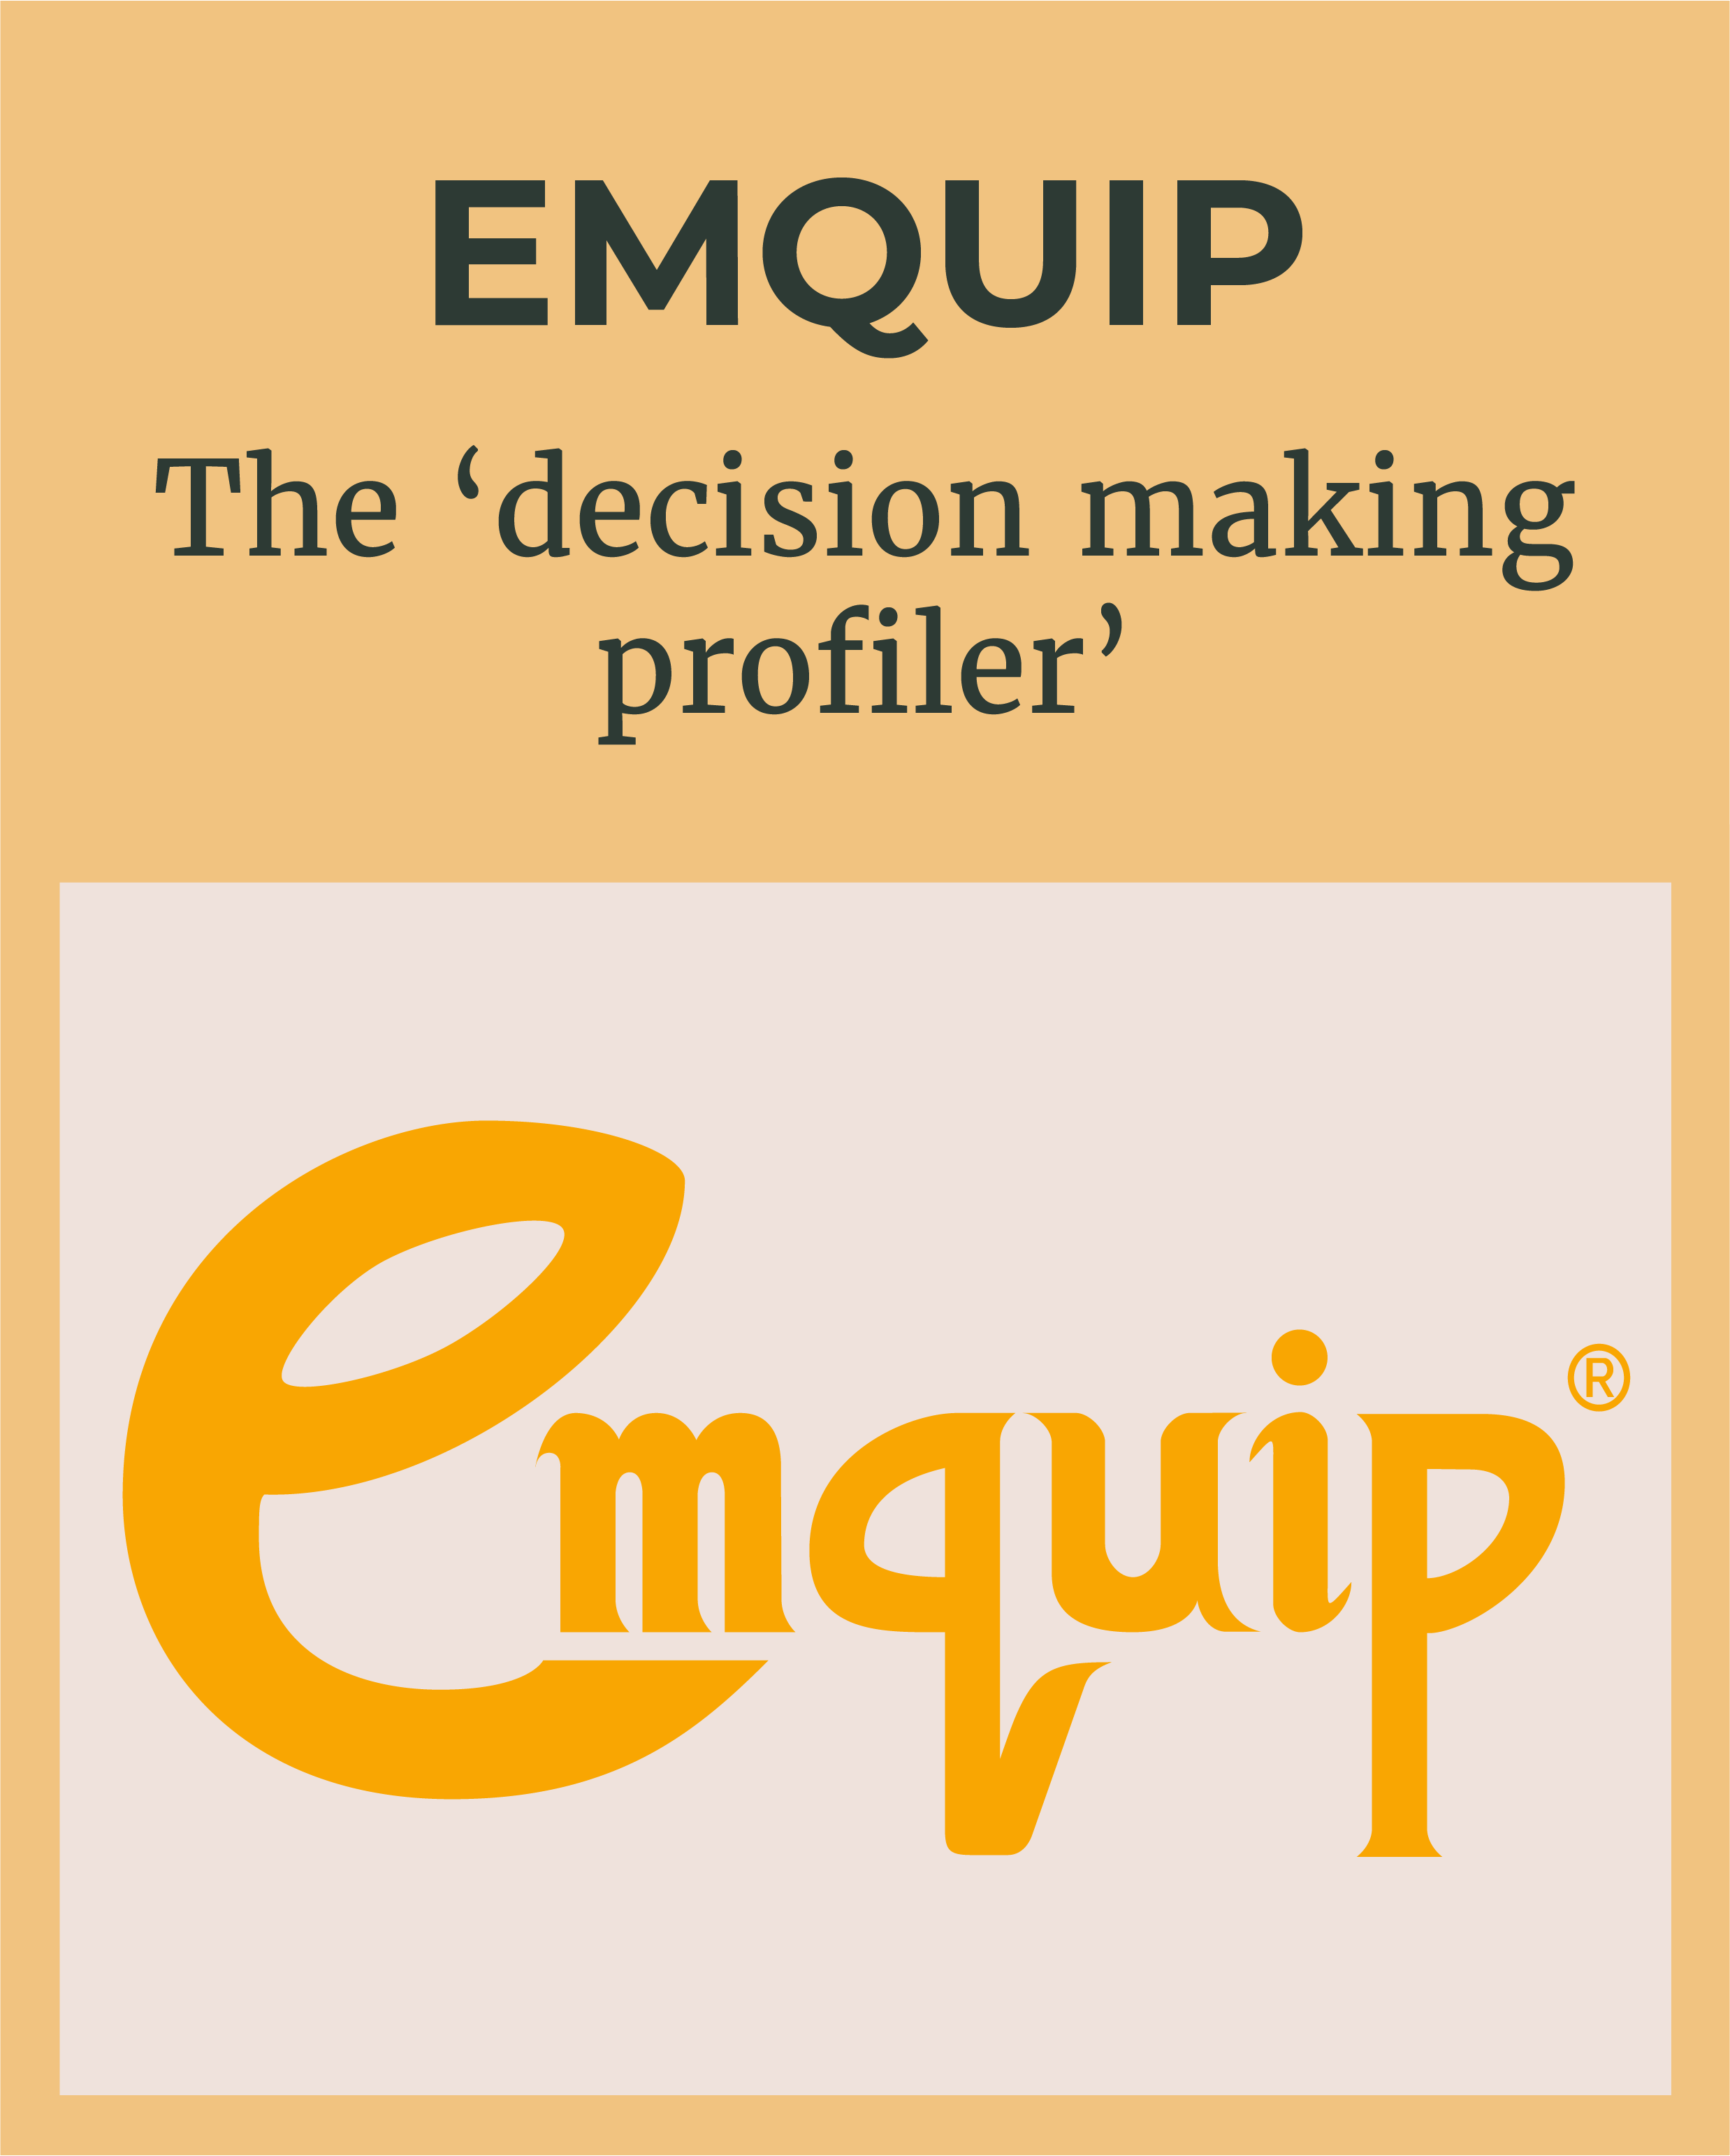 Logo of EMQUIP - the research product that is the 'decision making profiler'